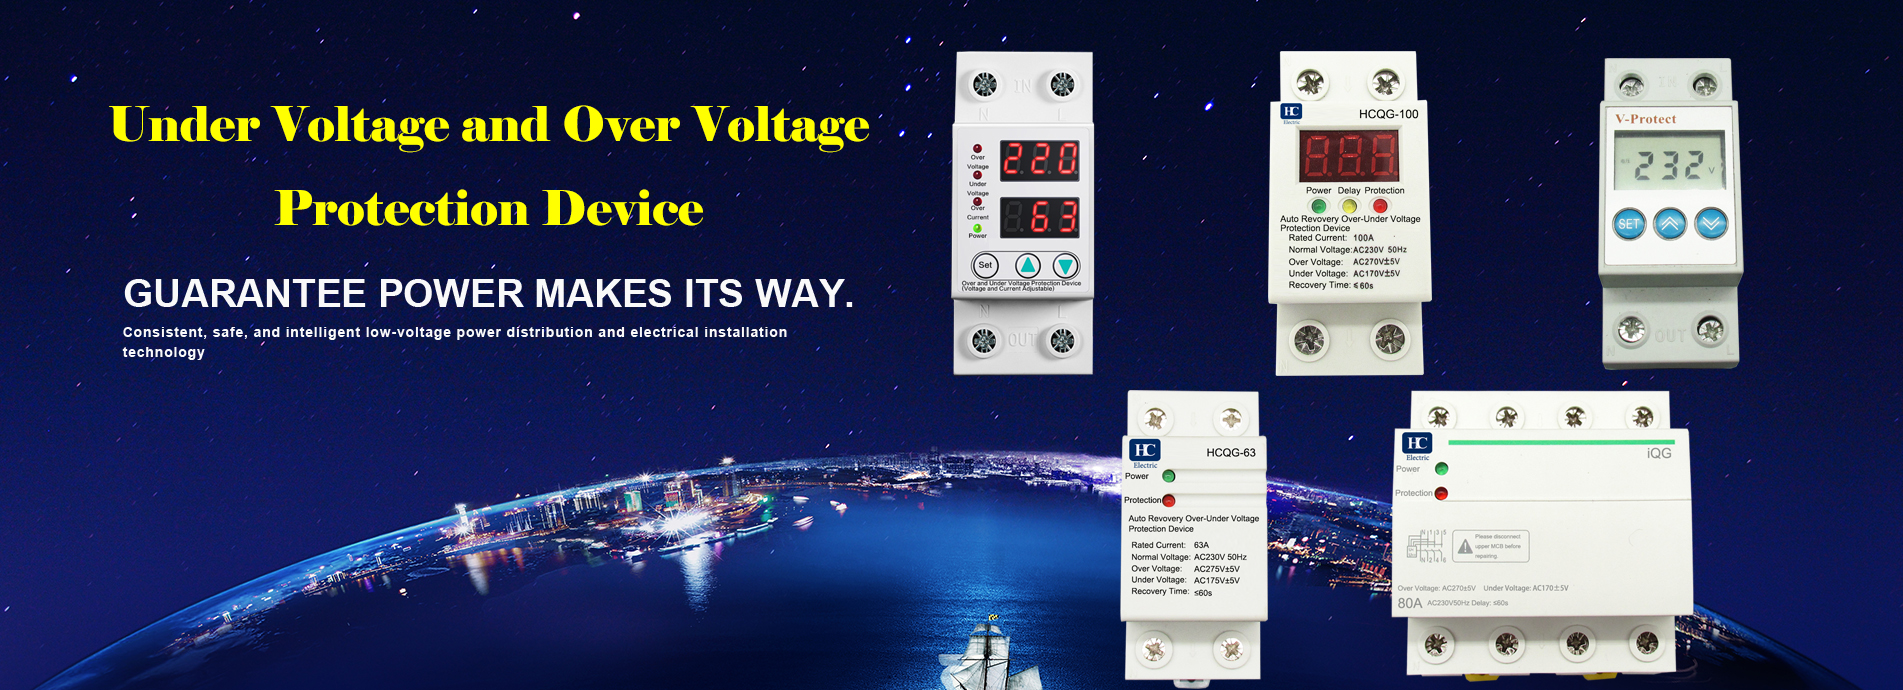 Flash 1 Voltage Protection Device